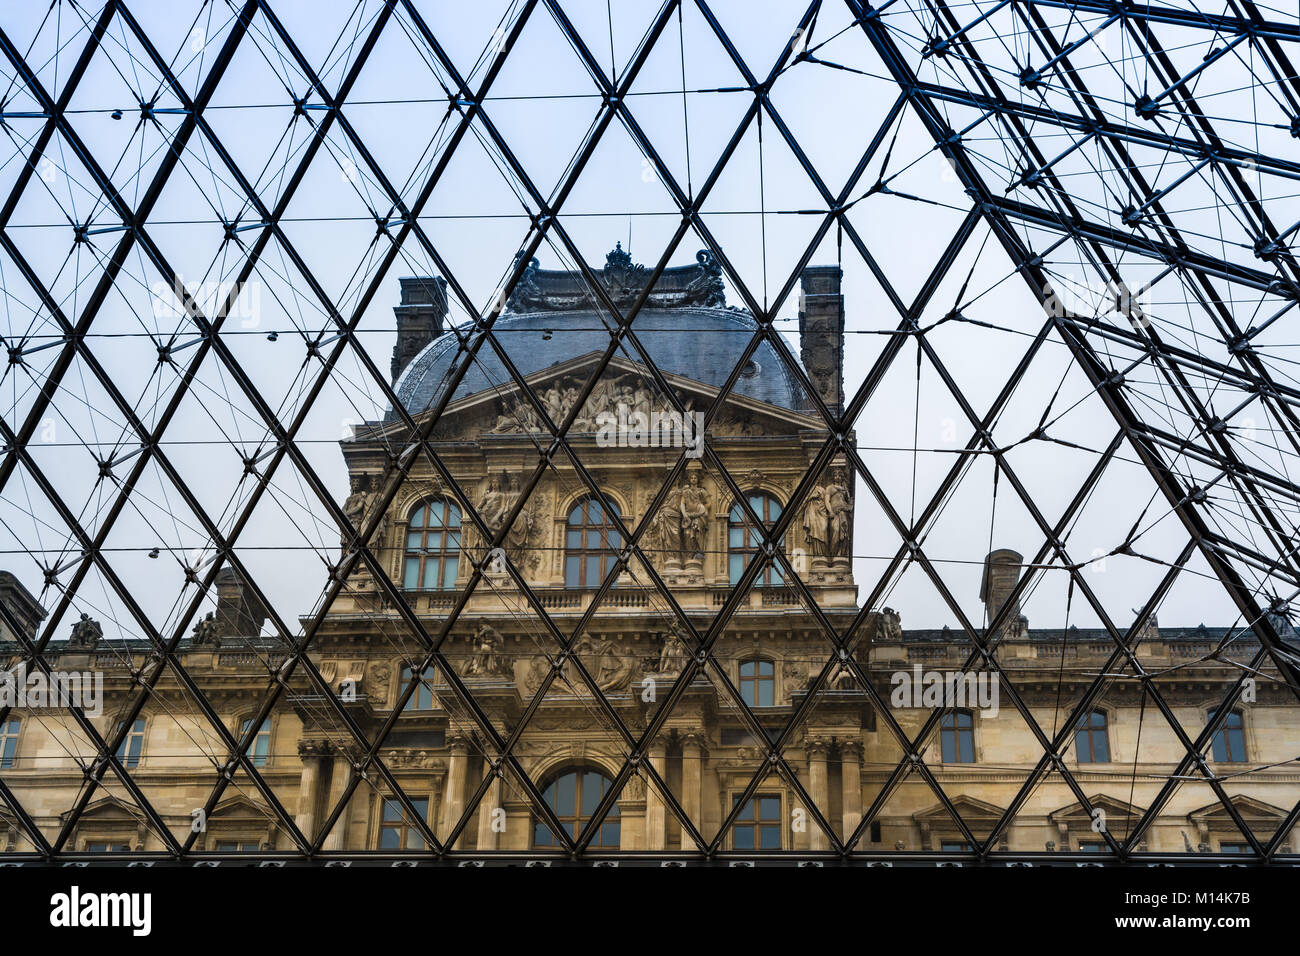 Paris, France - December 11, 2017: One of the Louvre museum's pavilions viewed from within the glas and metal pyramid. Stock Photo